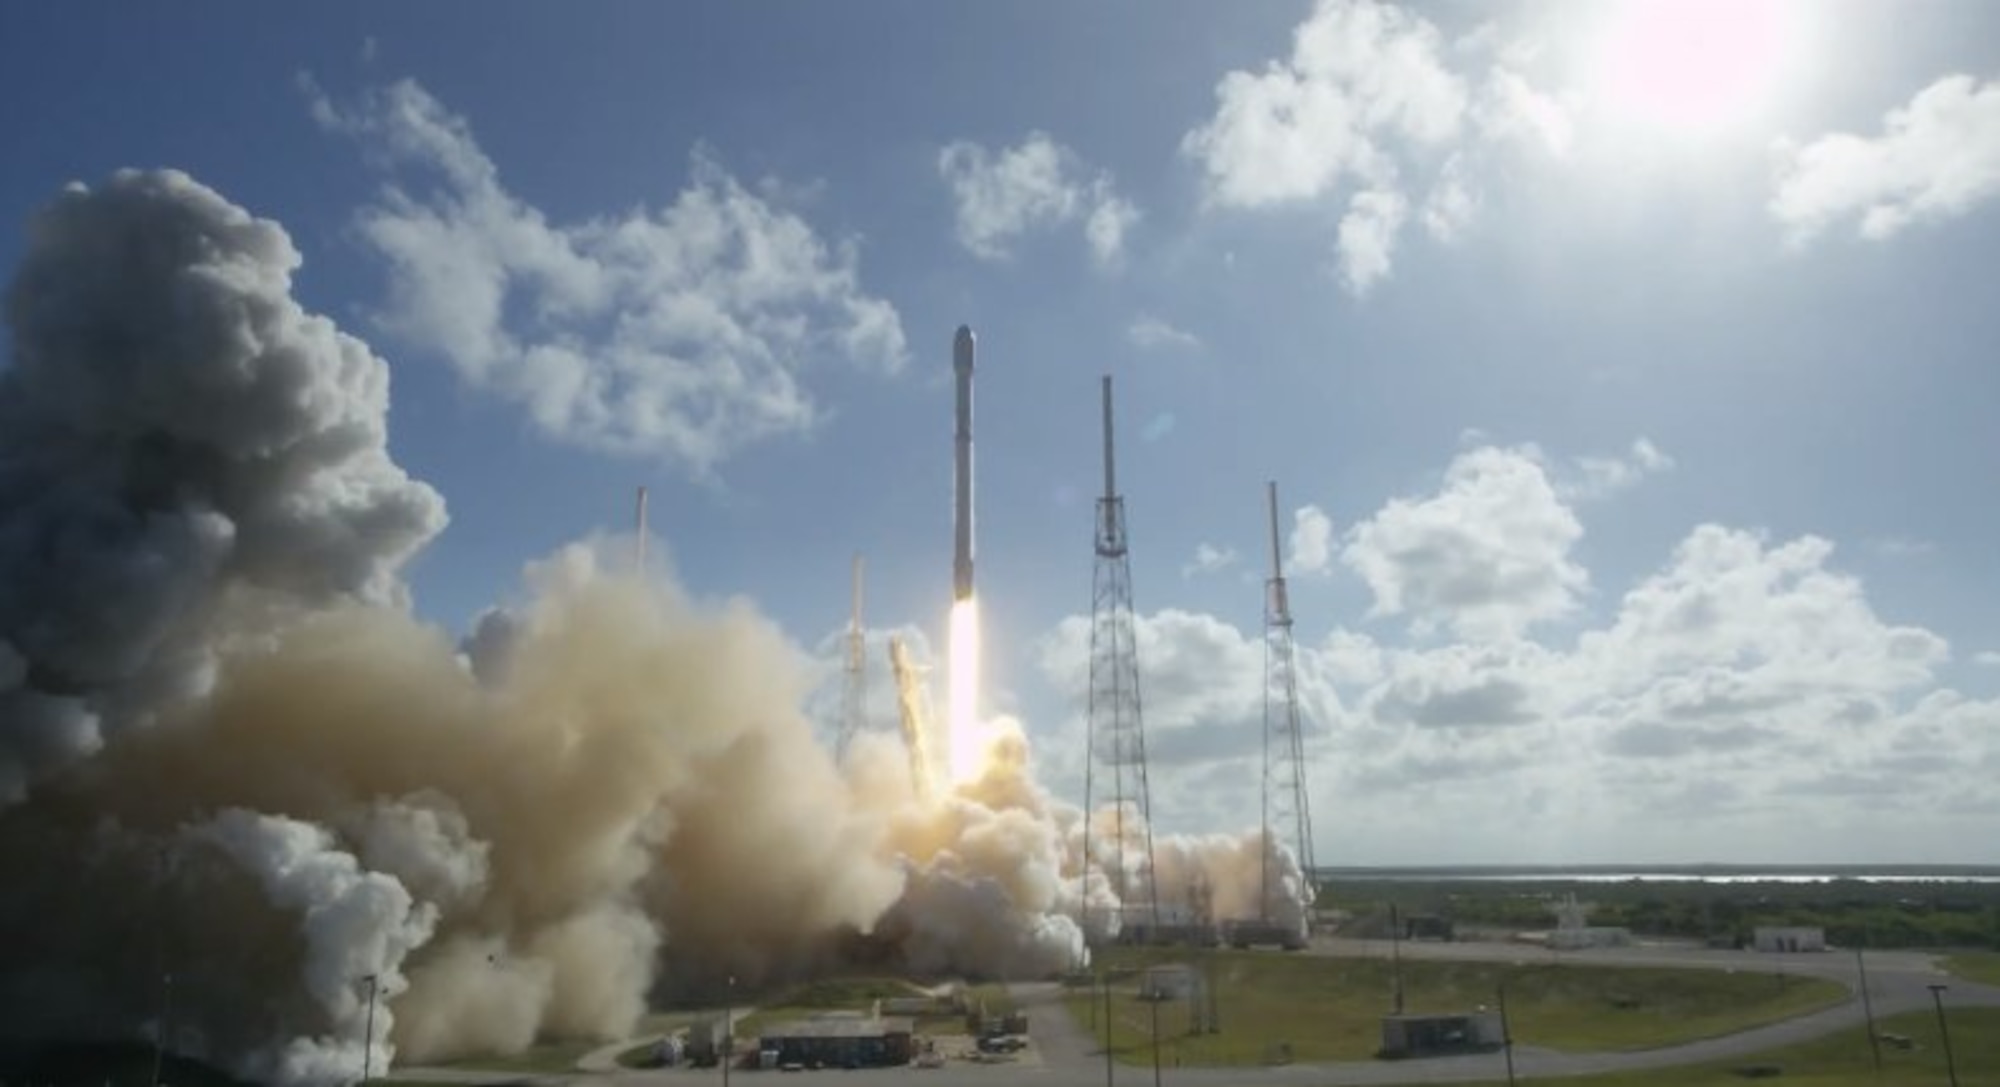 The U.S. Air Force’s 45th Space Wing supported the successful SpaceX Falcon 9 THAICOM-8 launch May 27, 2016, at 5:39 p.m. ET from Launch Complex 40 at Cape Canaveral Air Force Station, Florida.